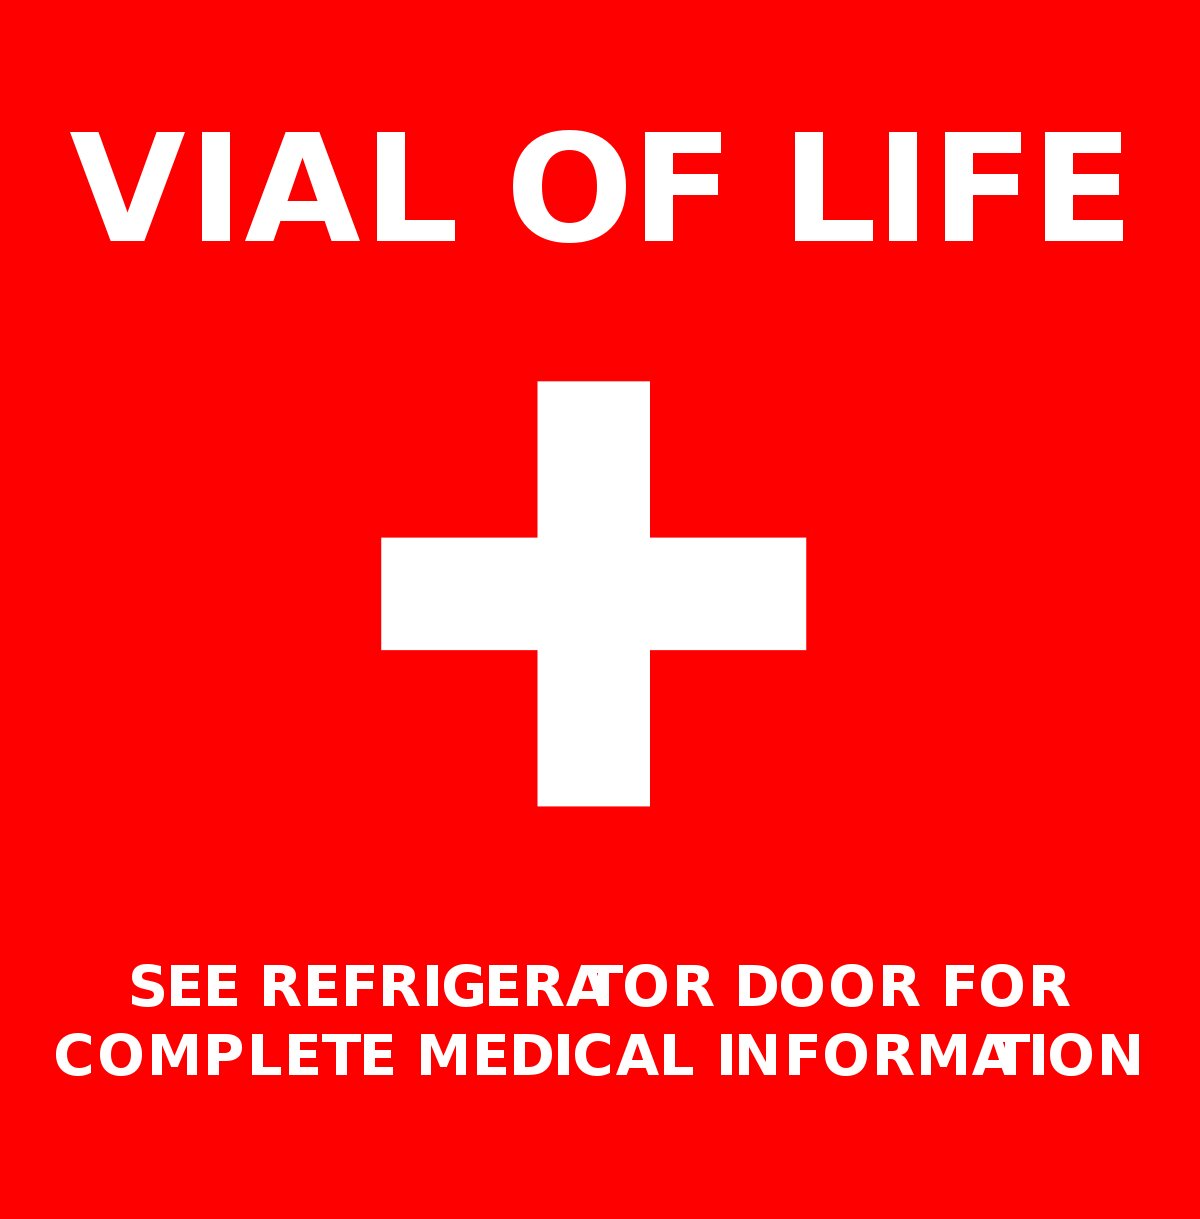 The Vial of Life program involves placing a red Vial of Life decal on the front door of the residence, ensuring its visibility to first responders. Additionally, a second decal is placed in a Ziploc bag that contains complete medical information, which is then positioned on the refrigerator door for access and viewing.